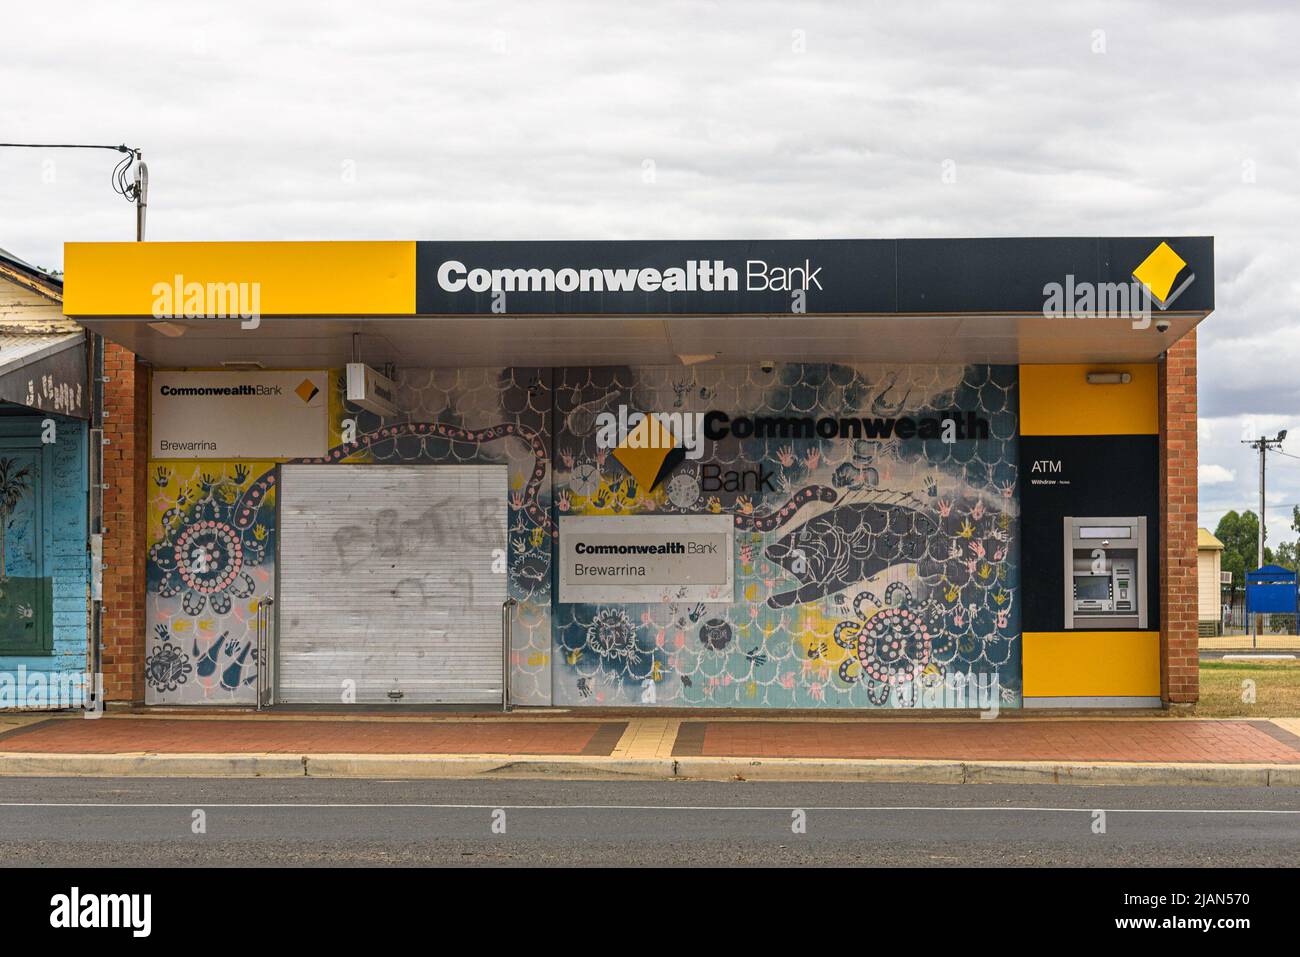 A Commonwealth Bank branch in Brewarrina, New South Wales Stock Photo